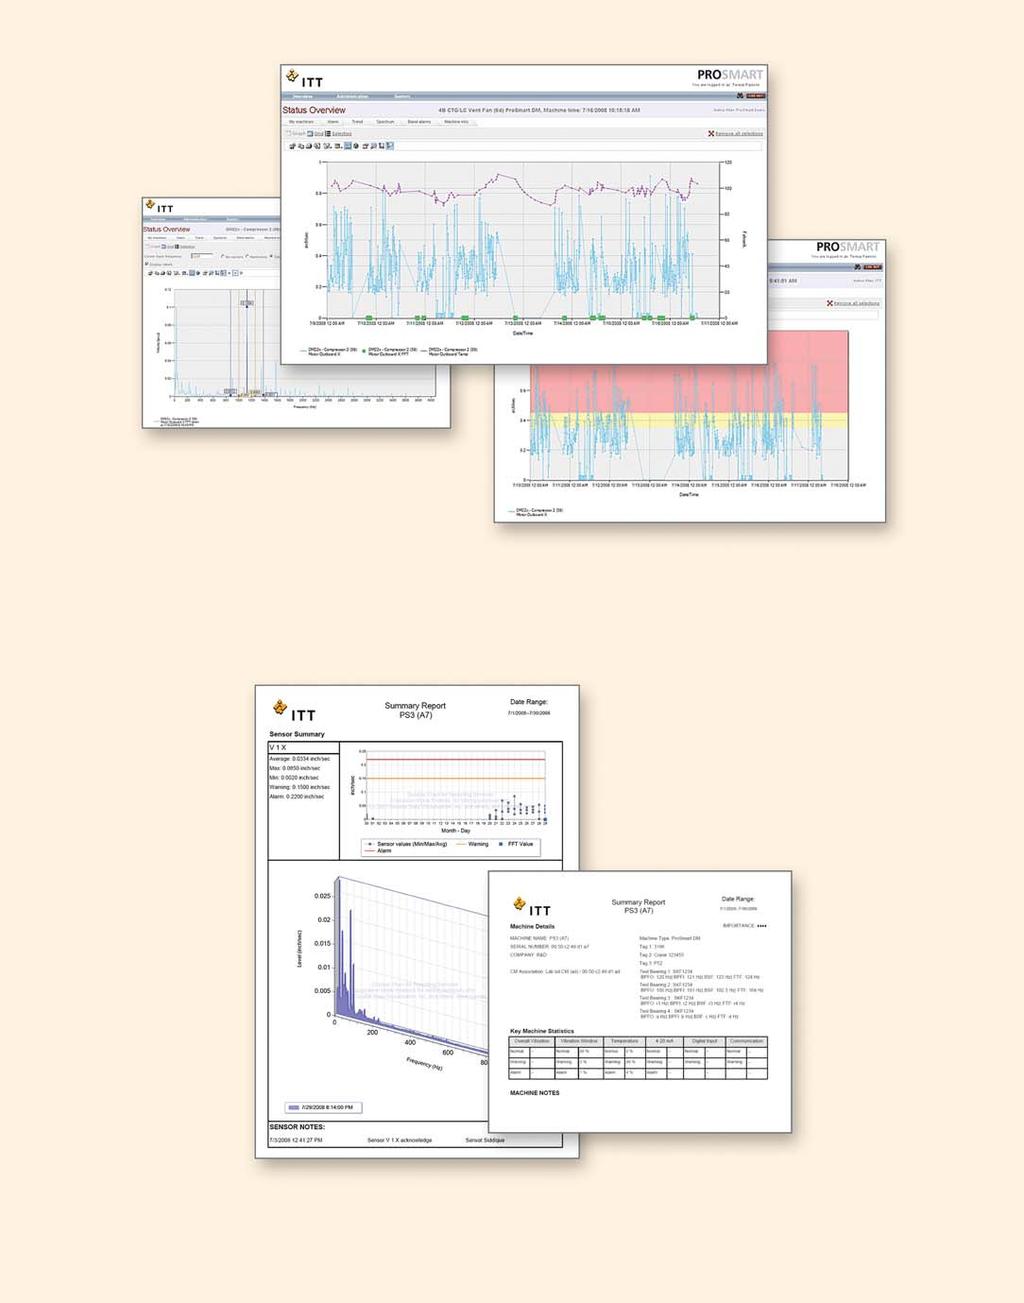 Trends ProNet provides the ability to trend and overlay data to easily visualize the interaction between different signals and perform root cause diagnosis.